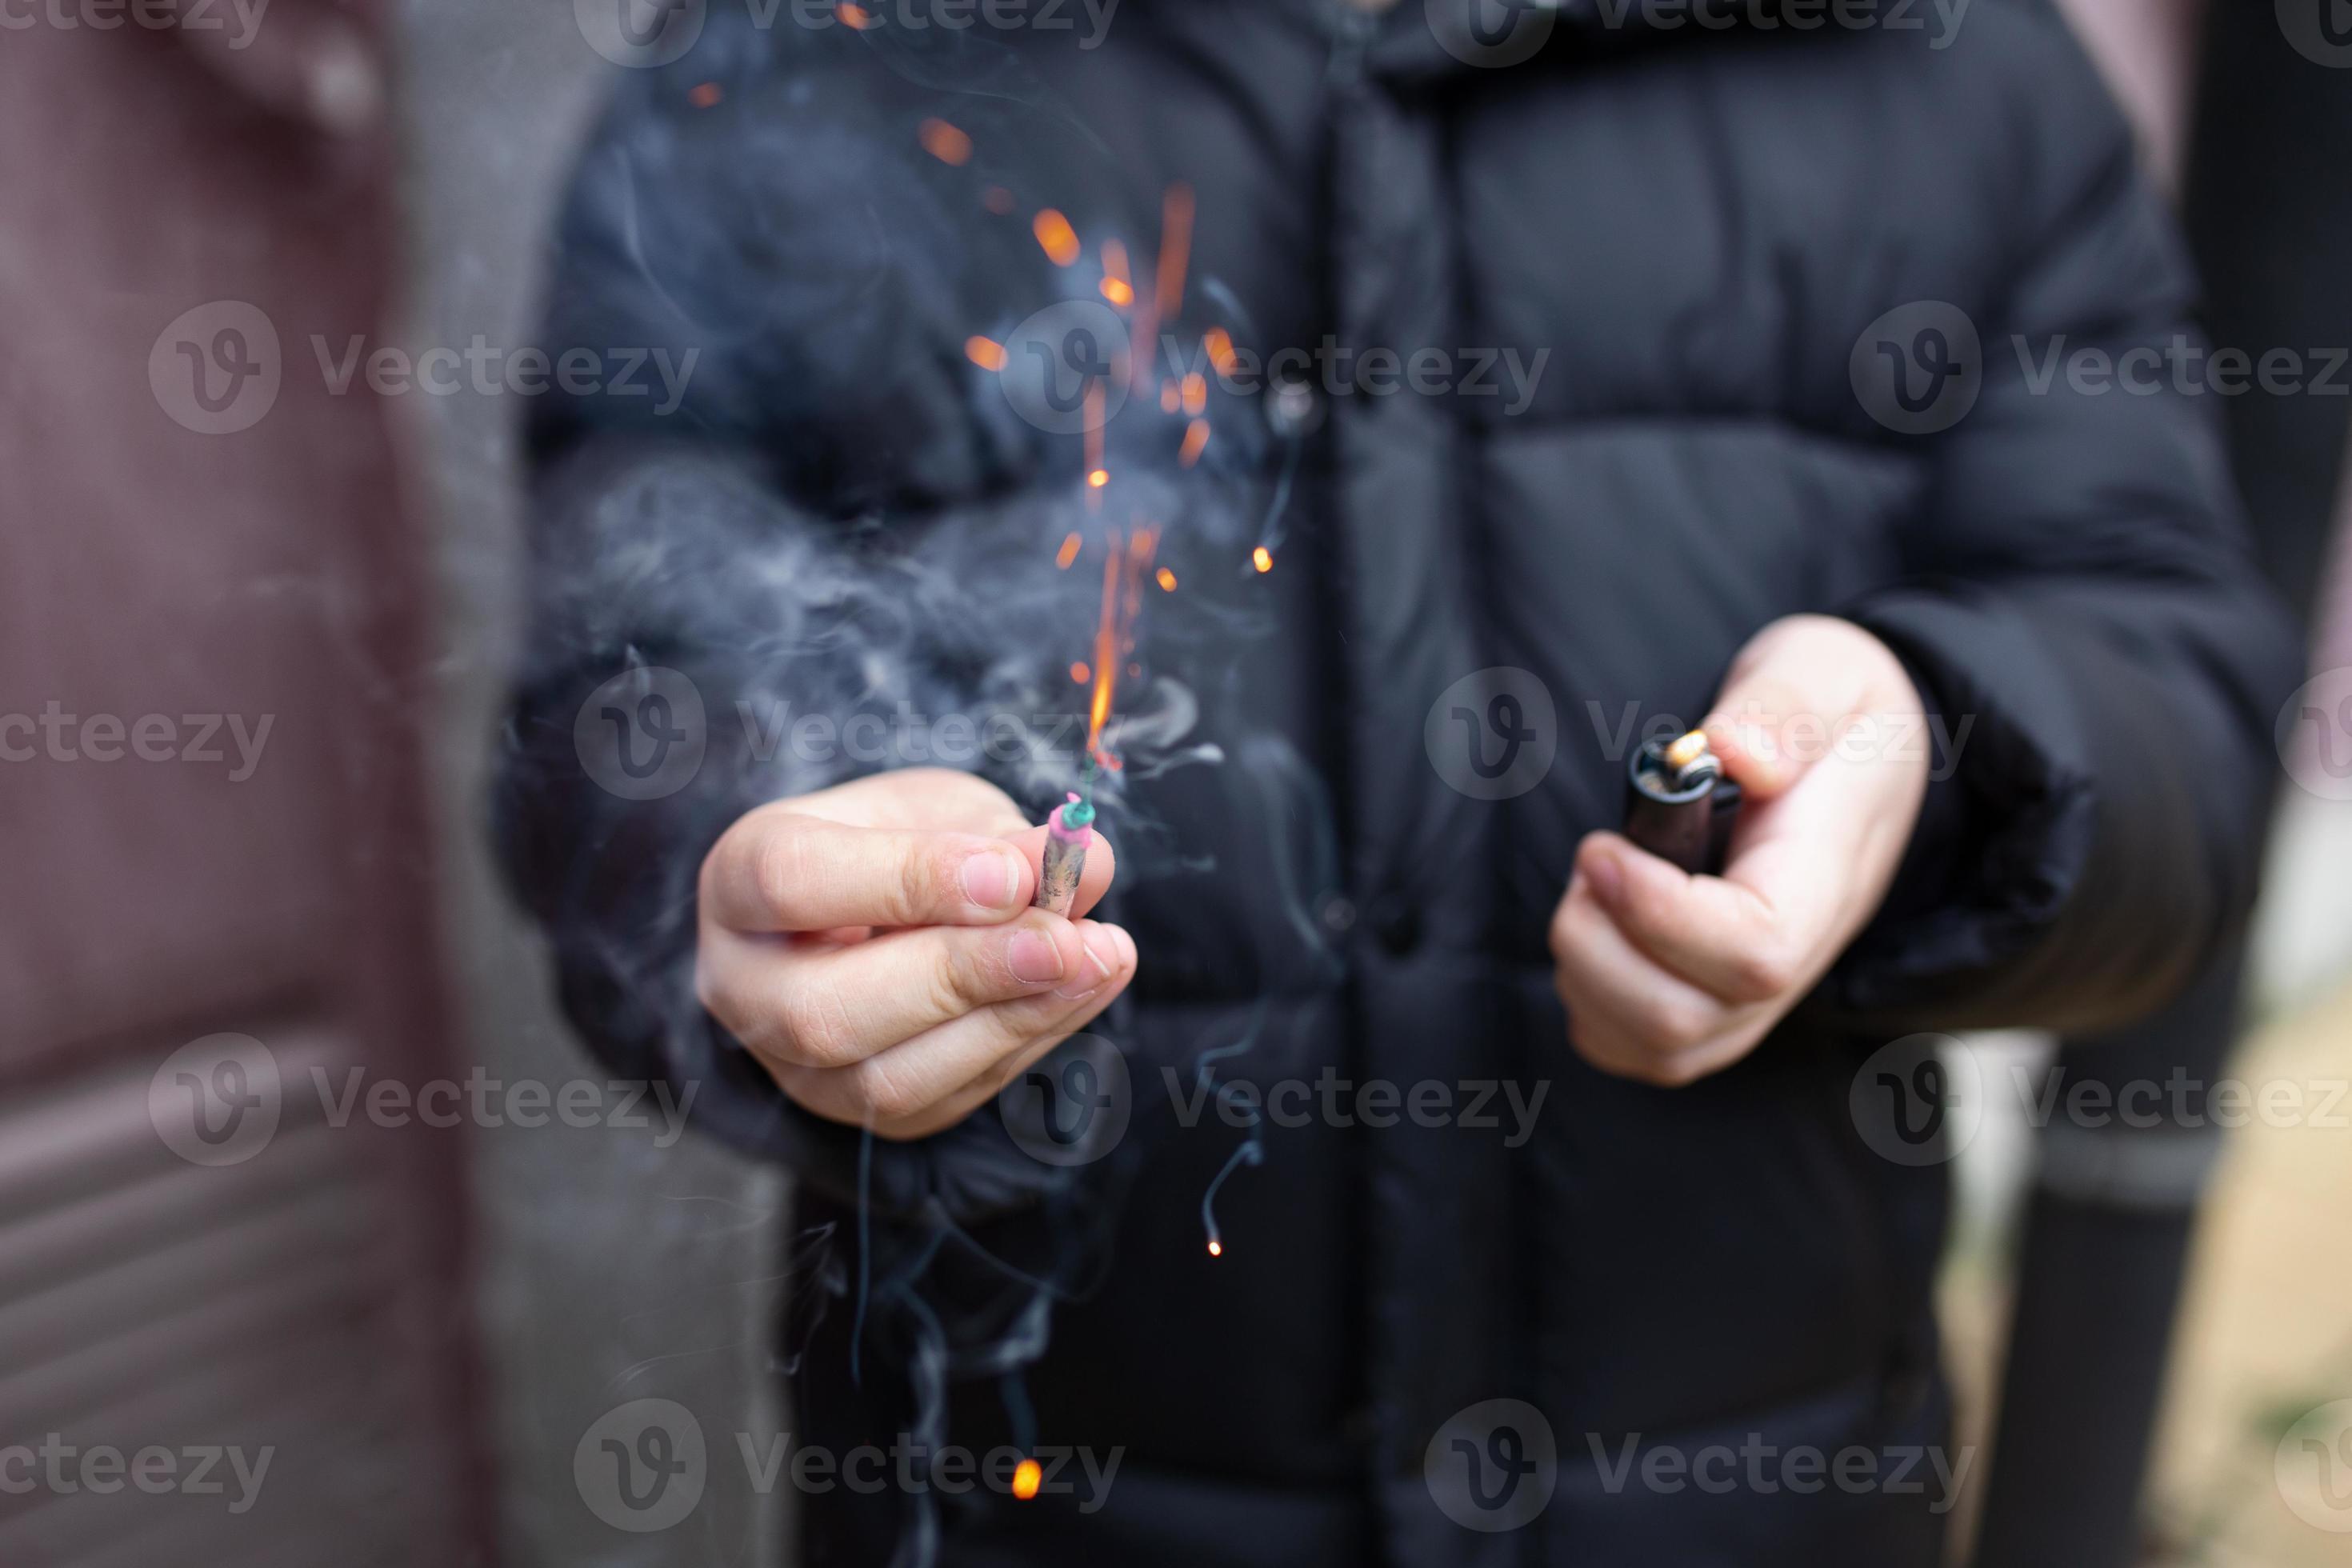 Premium Photo  Burning firecracker in a hand sparks and smoke of petard